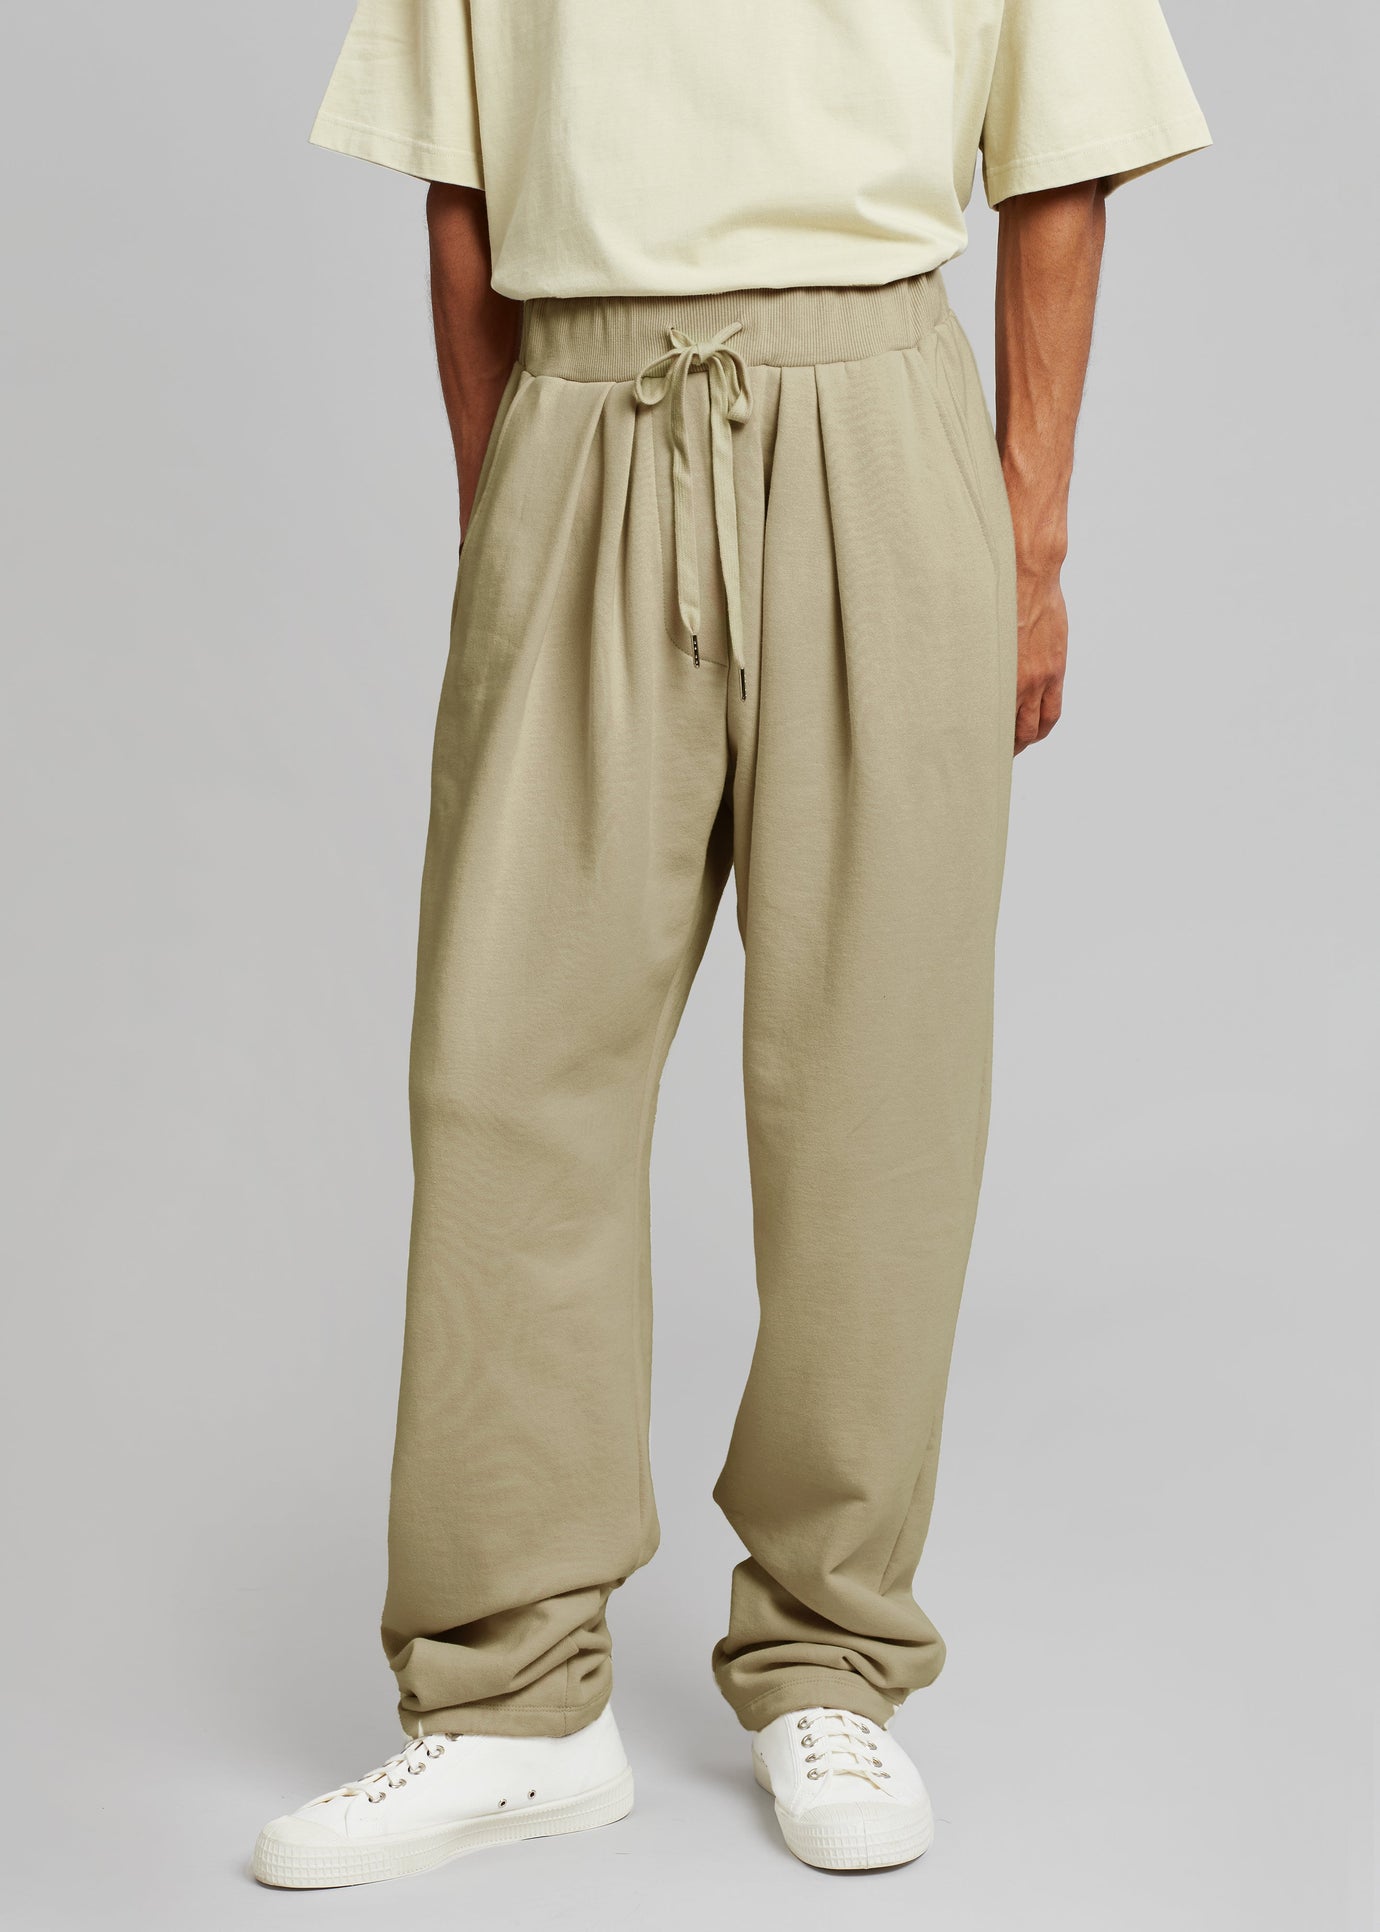 Alec Pleated Jogger Pants - Olive - 1